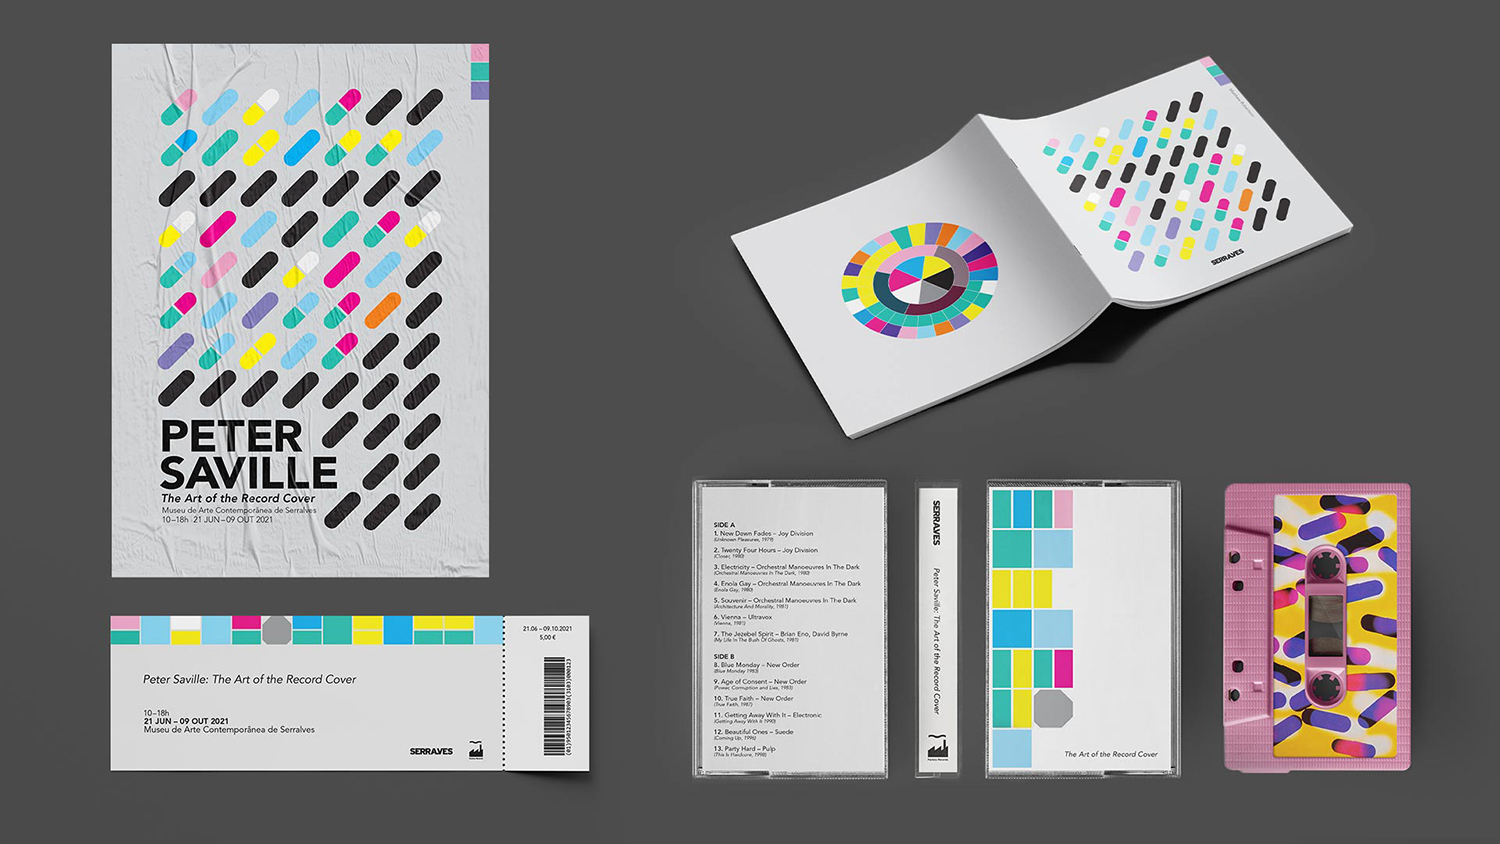 A poster, a ticket, a booklet and a cassette tape in the style of Peter Saville to promote an exhibition.